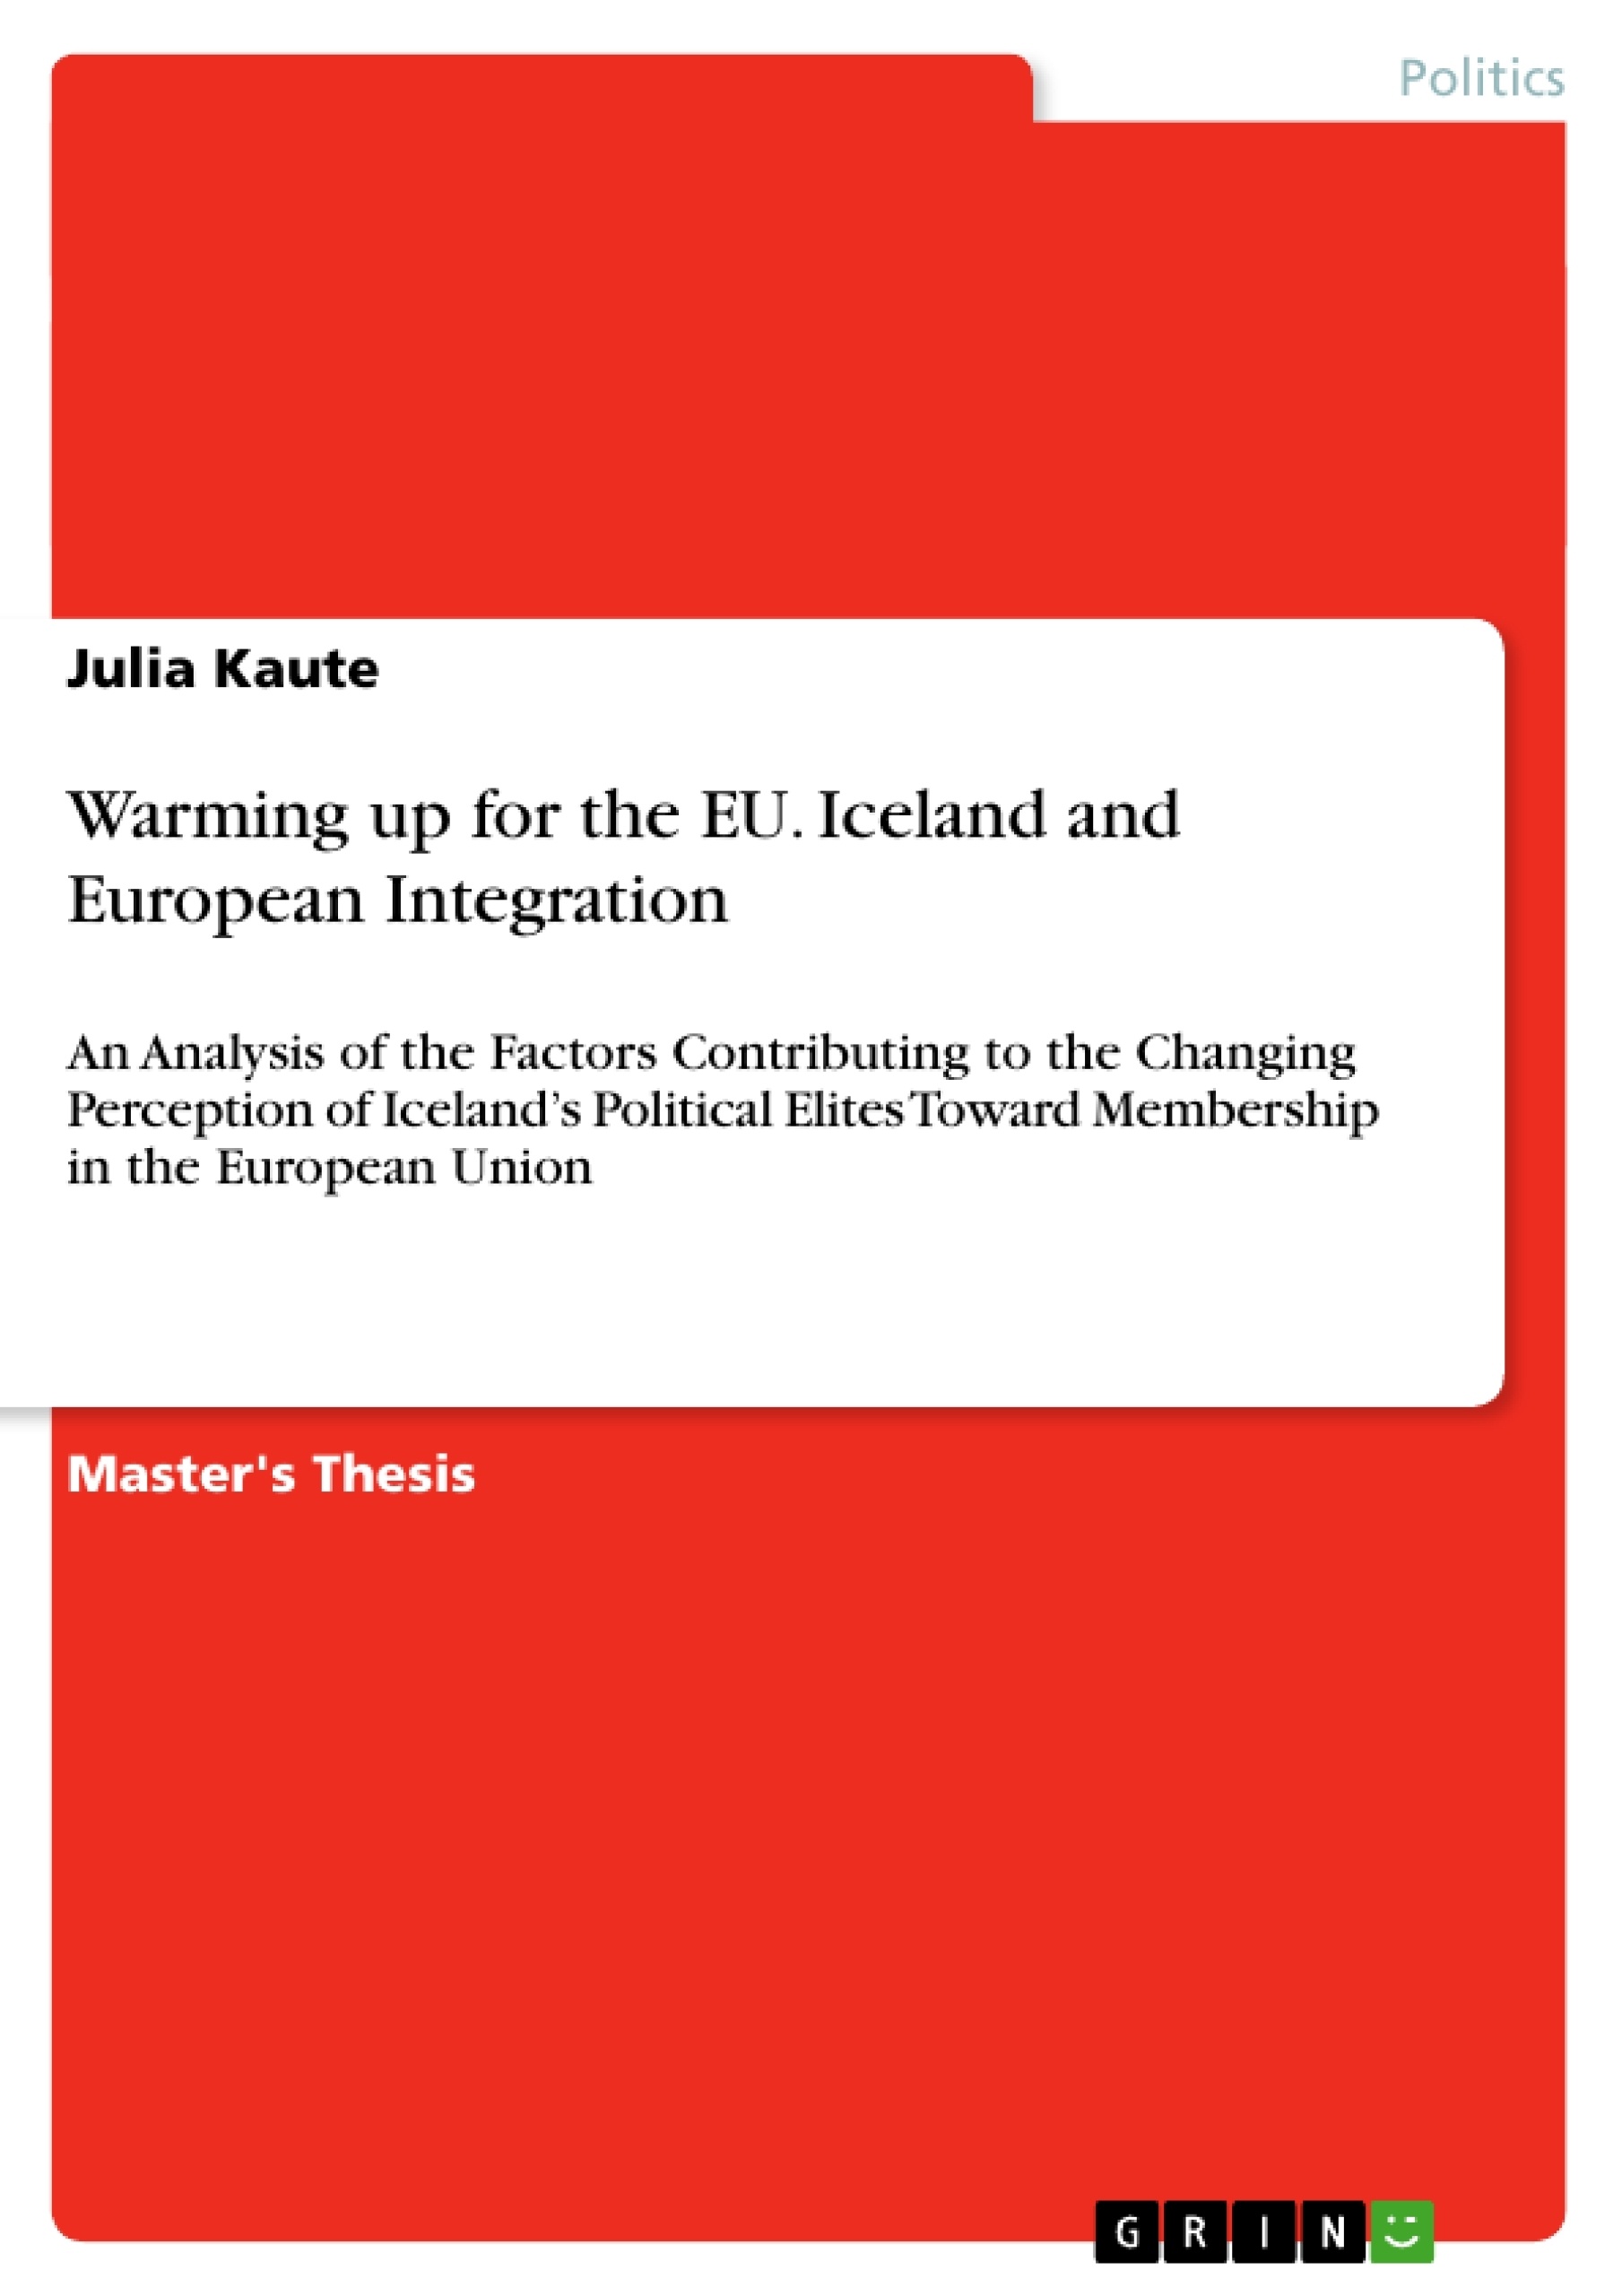 Title: Warming up for the EU. Iceland and European Integration